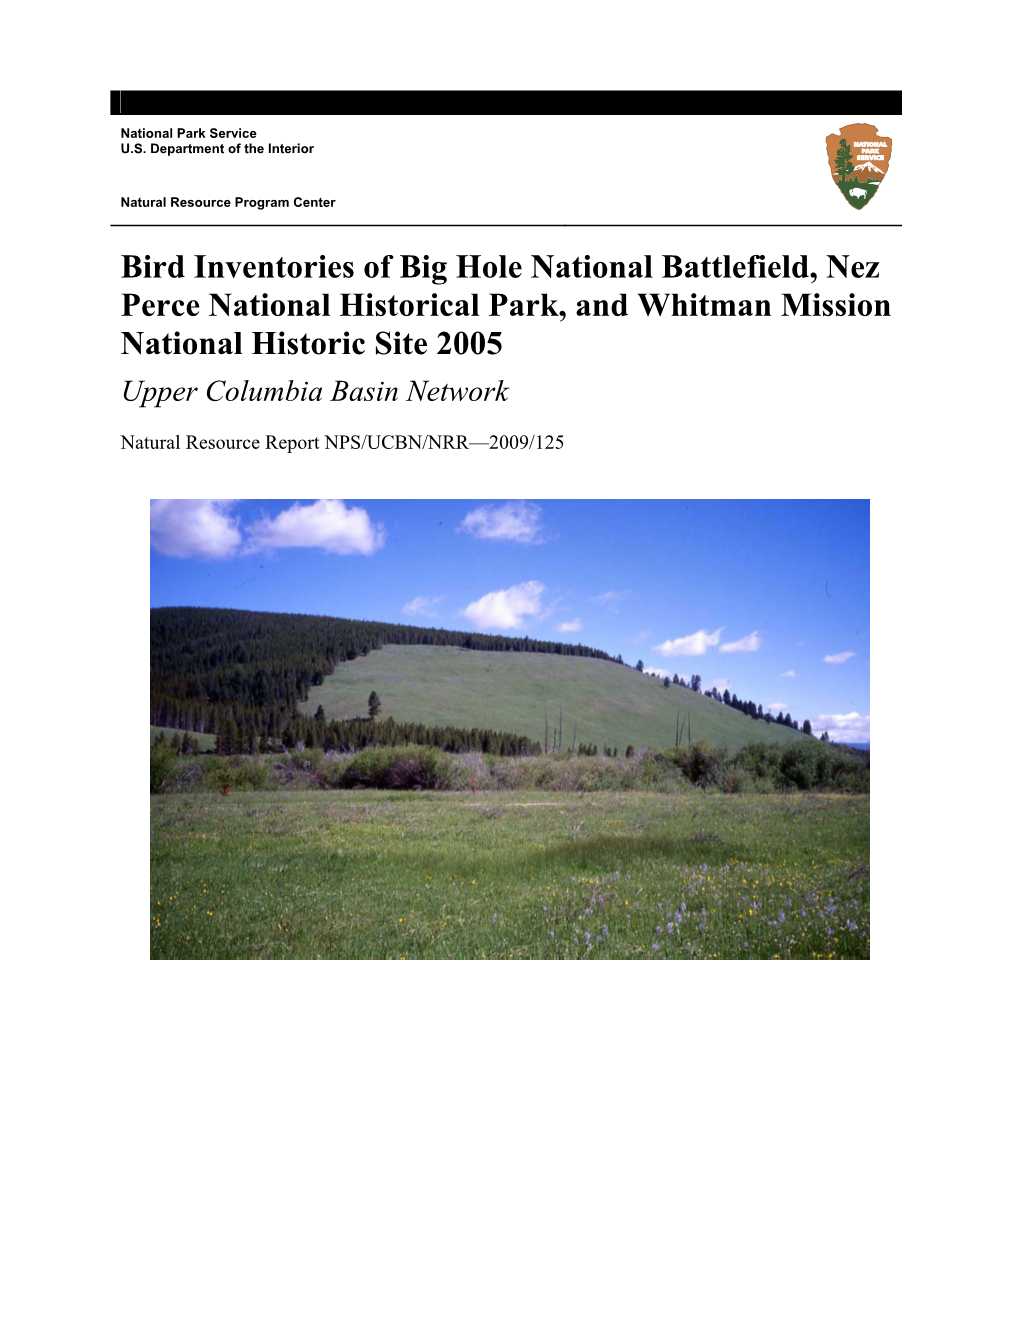 Bird Inventories of Big Hole National Battlefield, Nez Perce National Historical Park, and Whitman Mission National Historic Site 2005